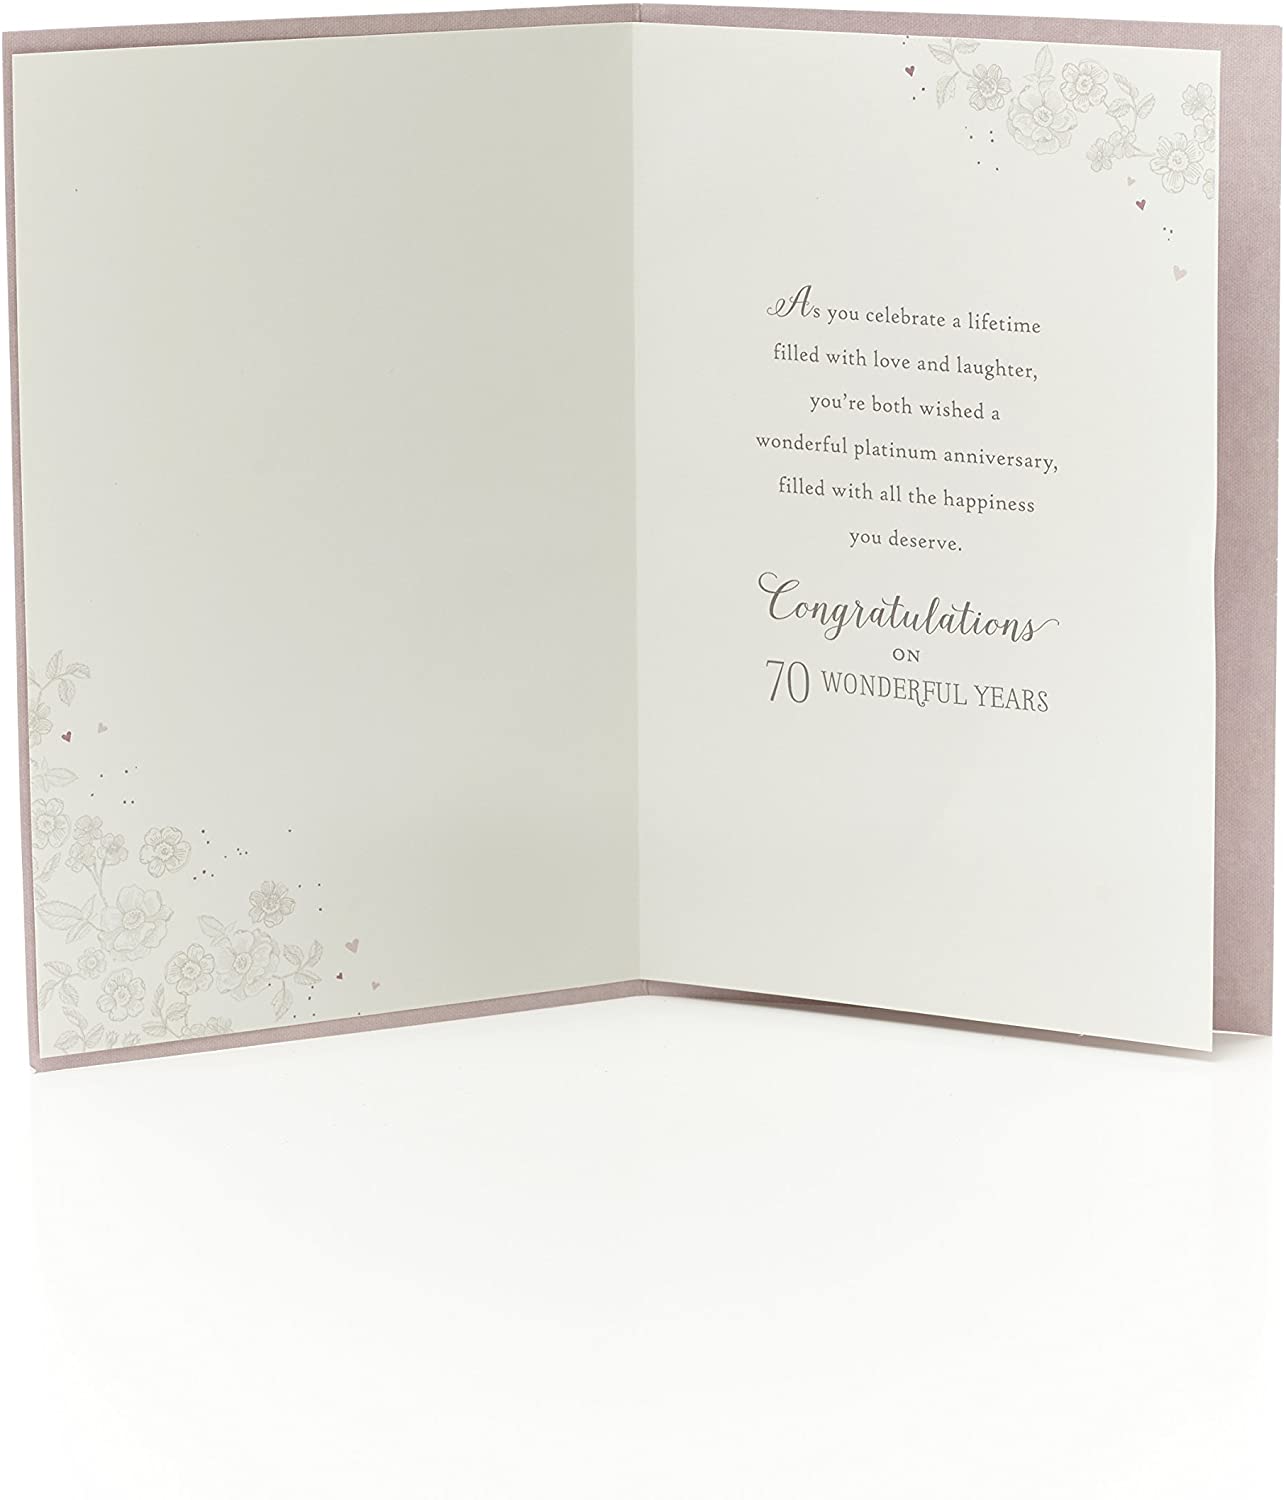 70th Wedding Anniversary Card - Platinum, Strong, And Enduring